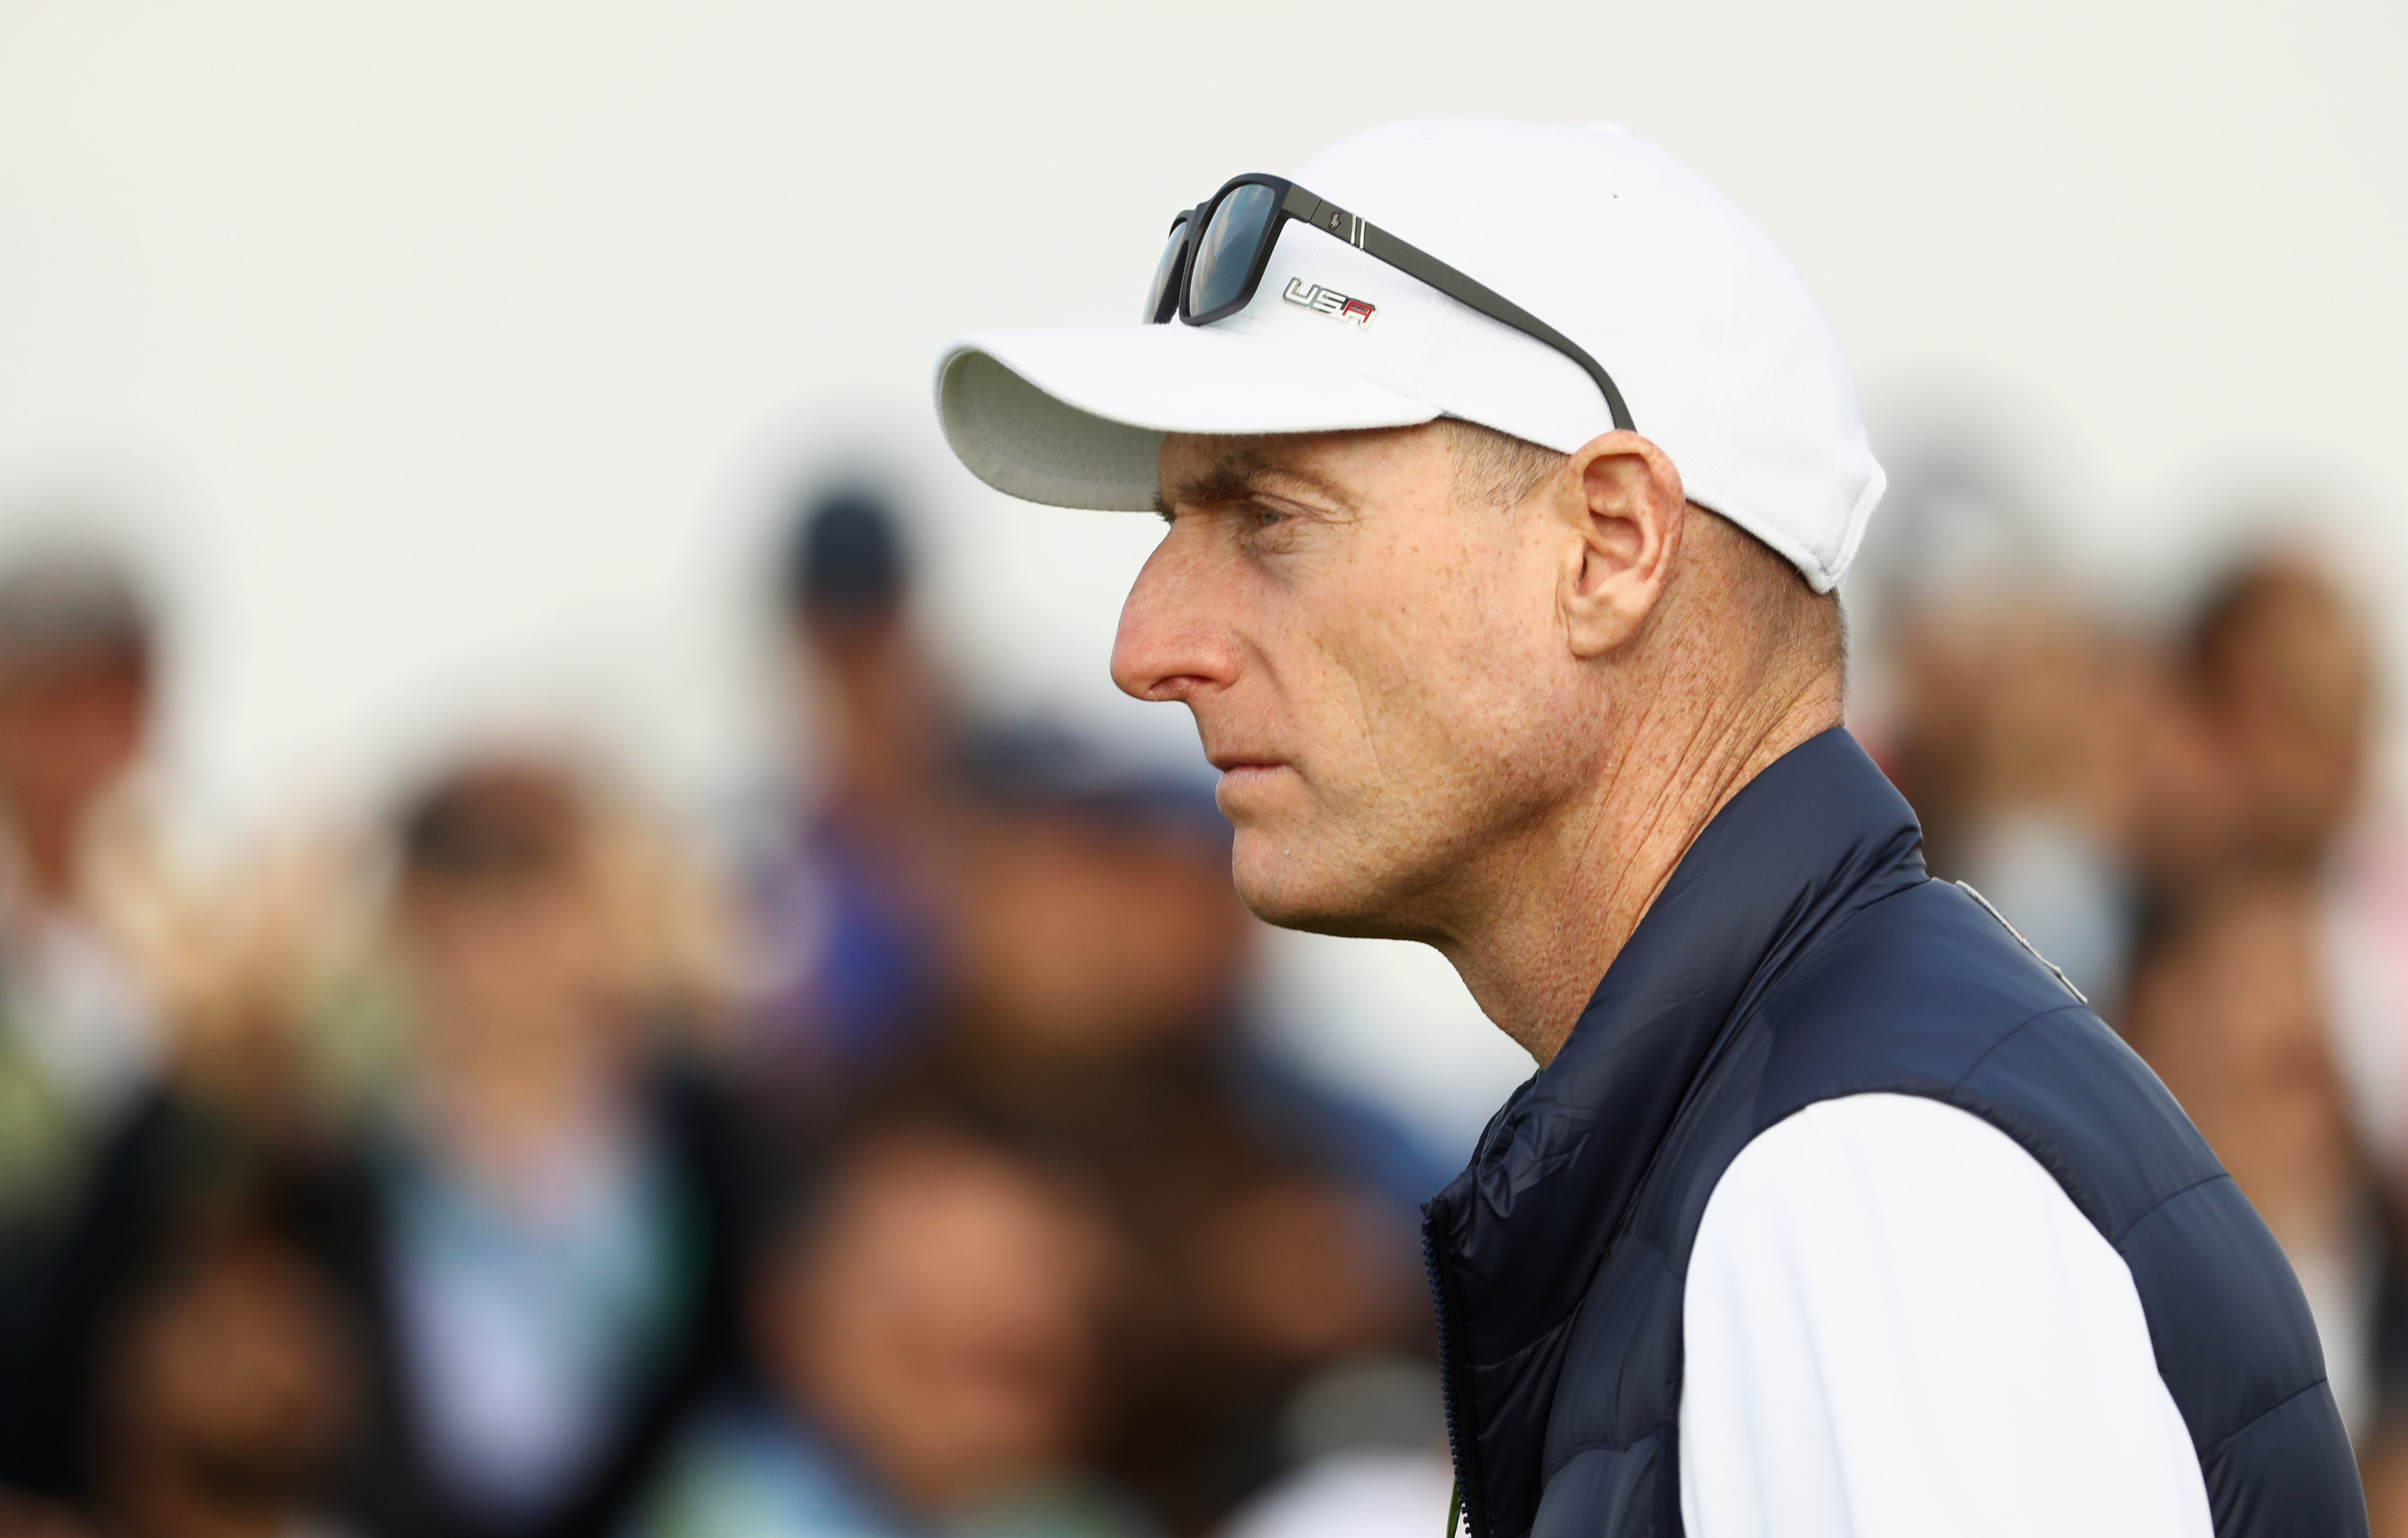 Jim Furyk had a disastrous afternoon session at the Ryder Cup in Paris.